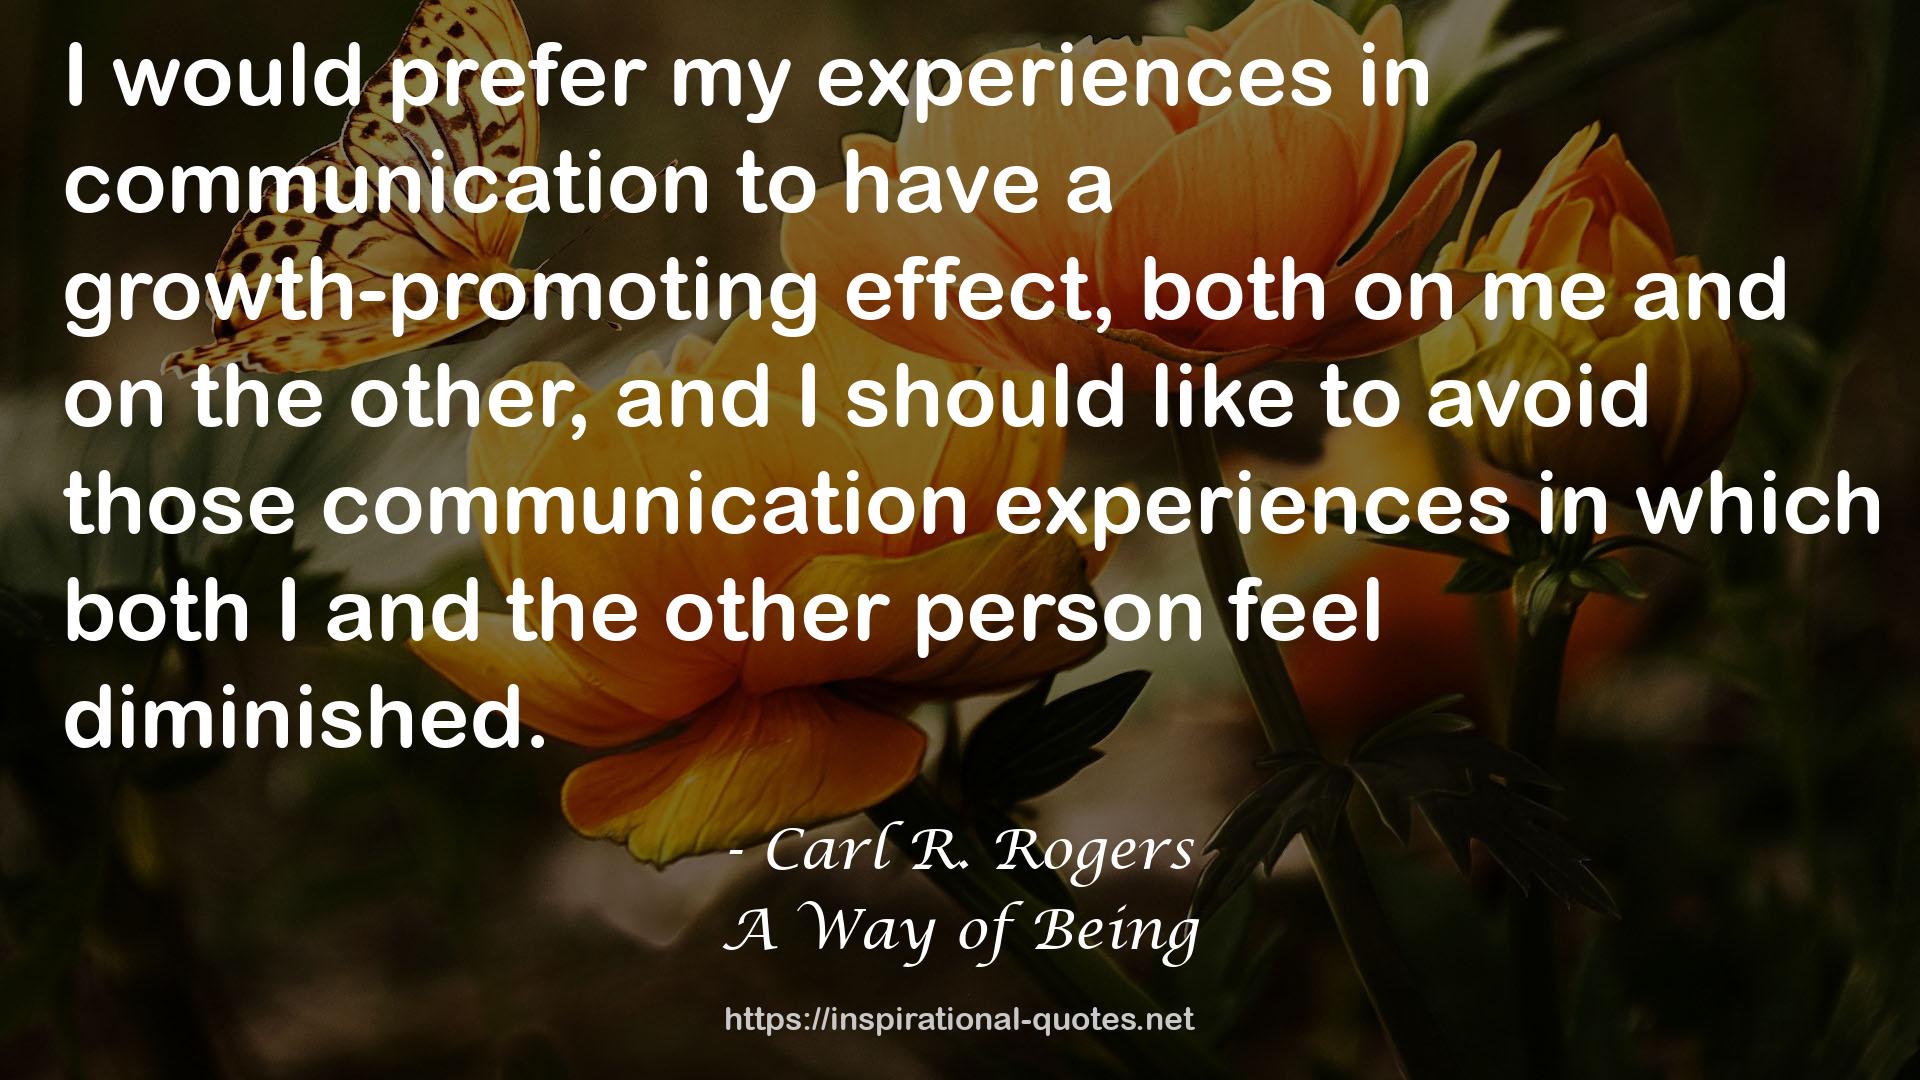 those communication experiences  QUOTES